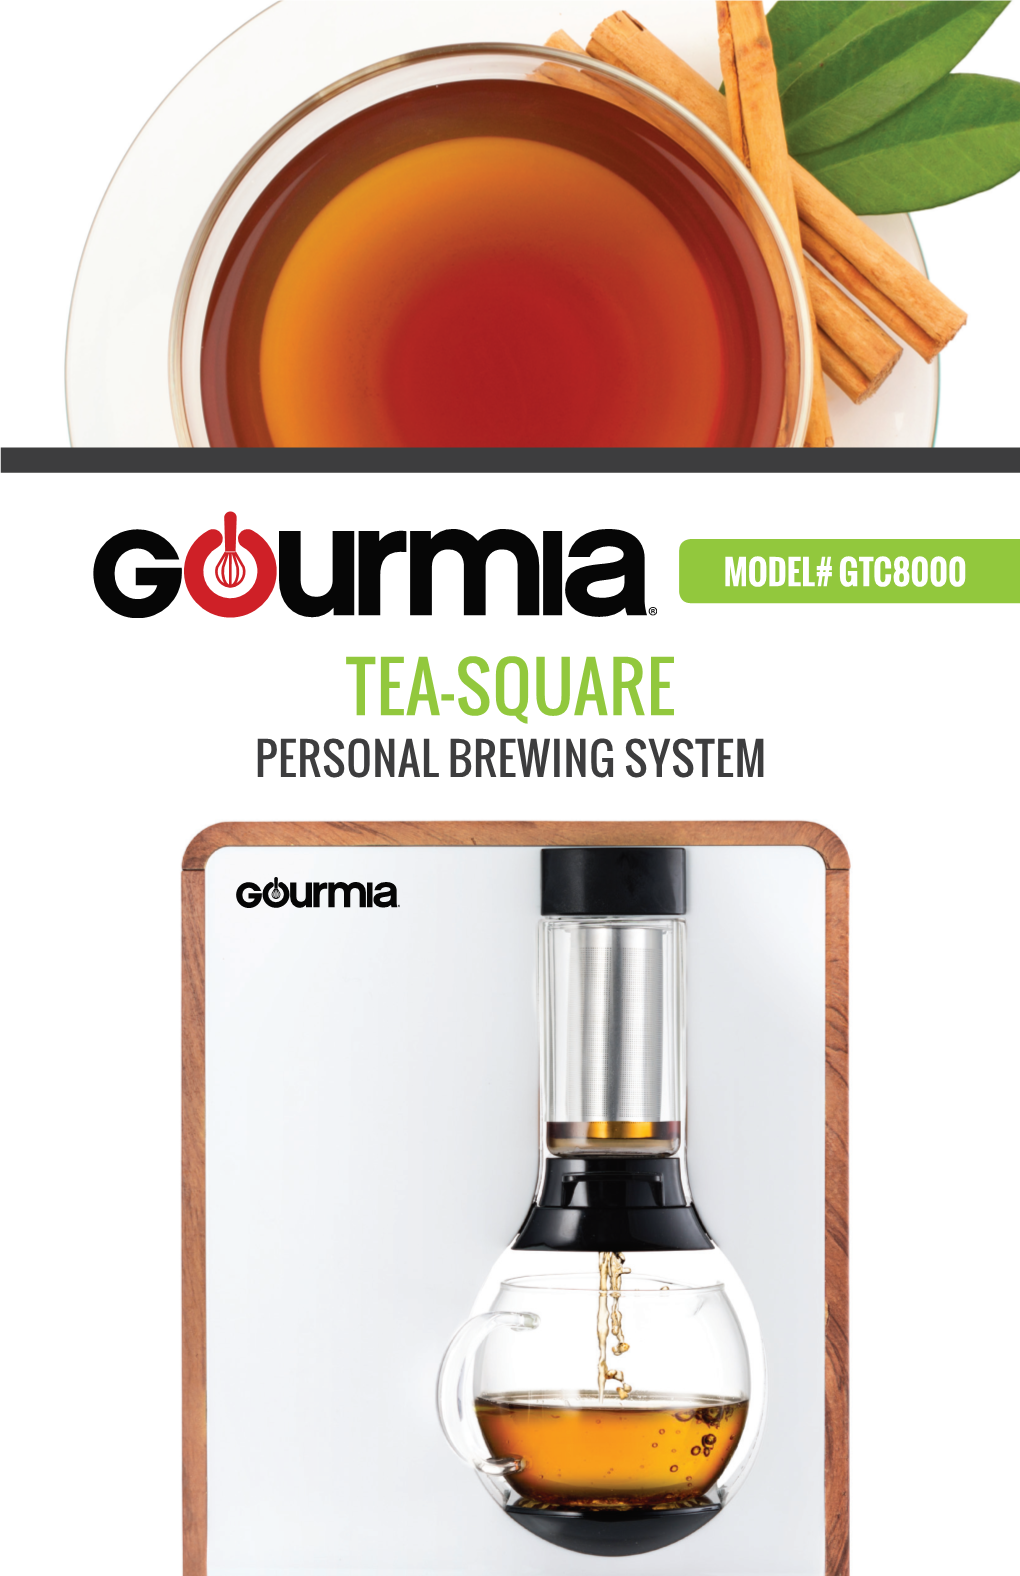 TEA-SQUARE PERSONAL BREWING SYSTEM Welcome to the Natural Purity of Fresh-Brewed Tea!